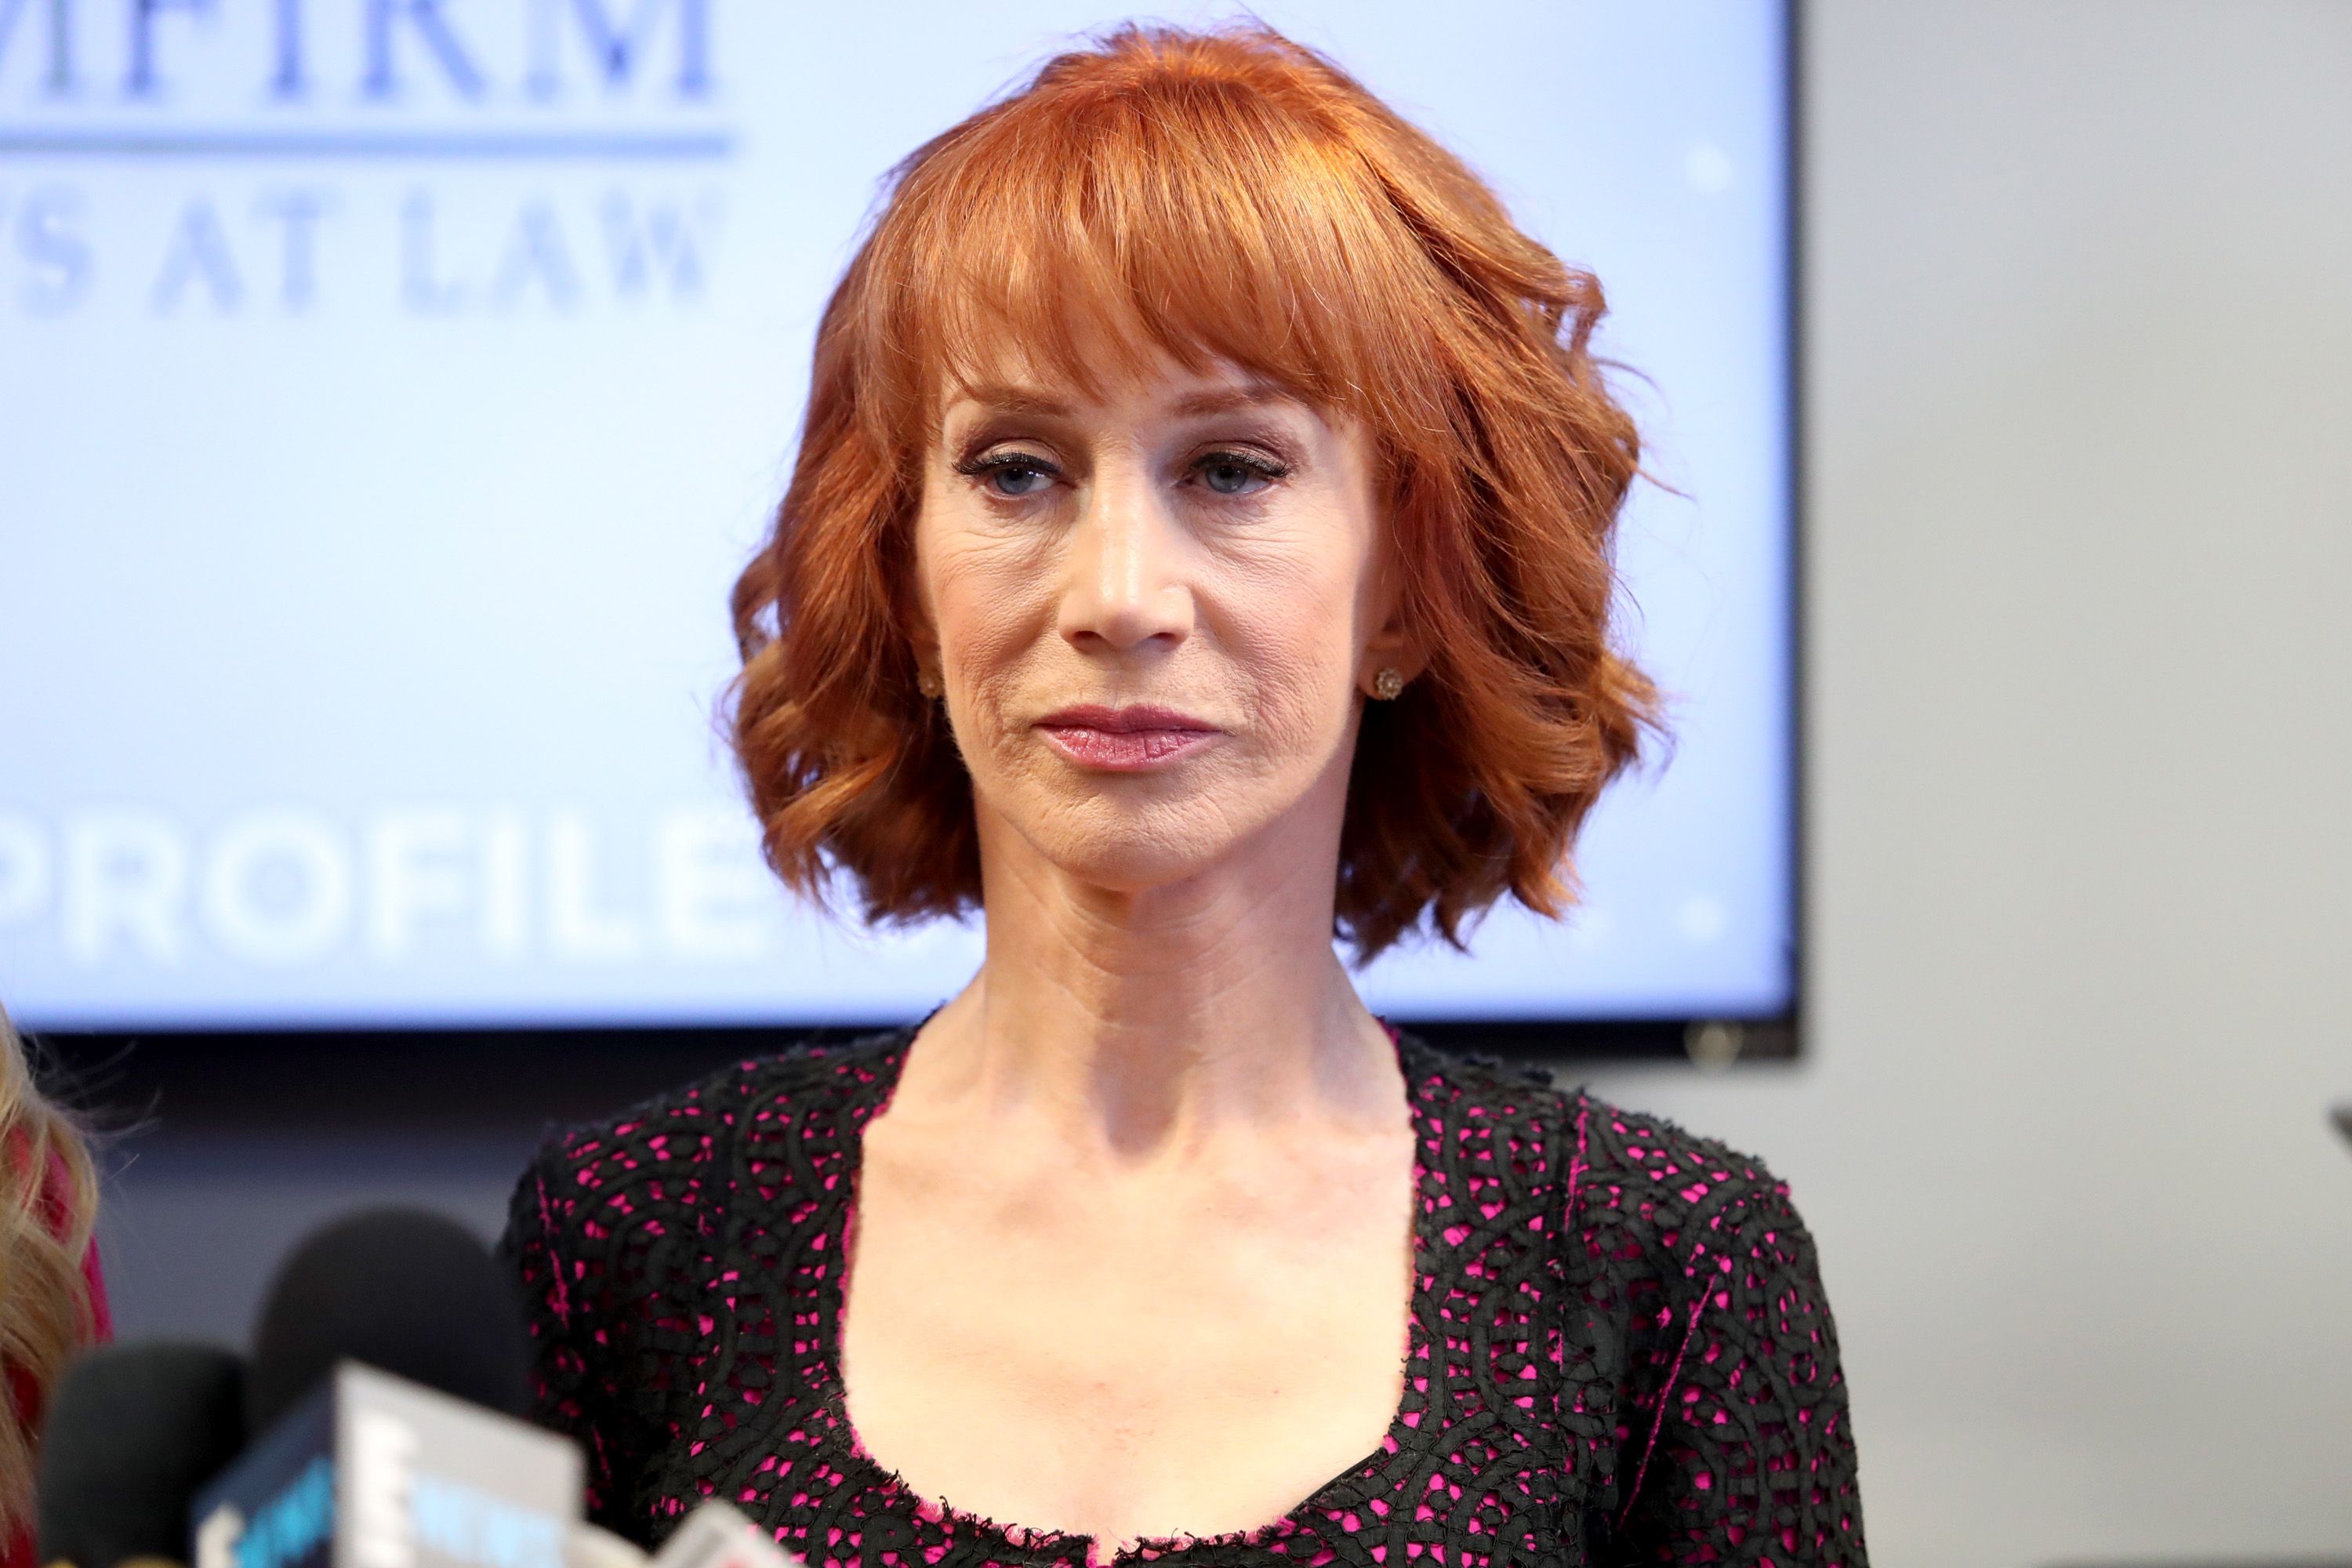 Kathy Griffin Questioned By Secret Service For Trump Photo